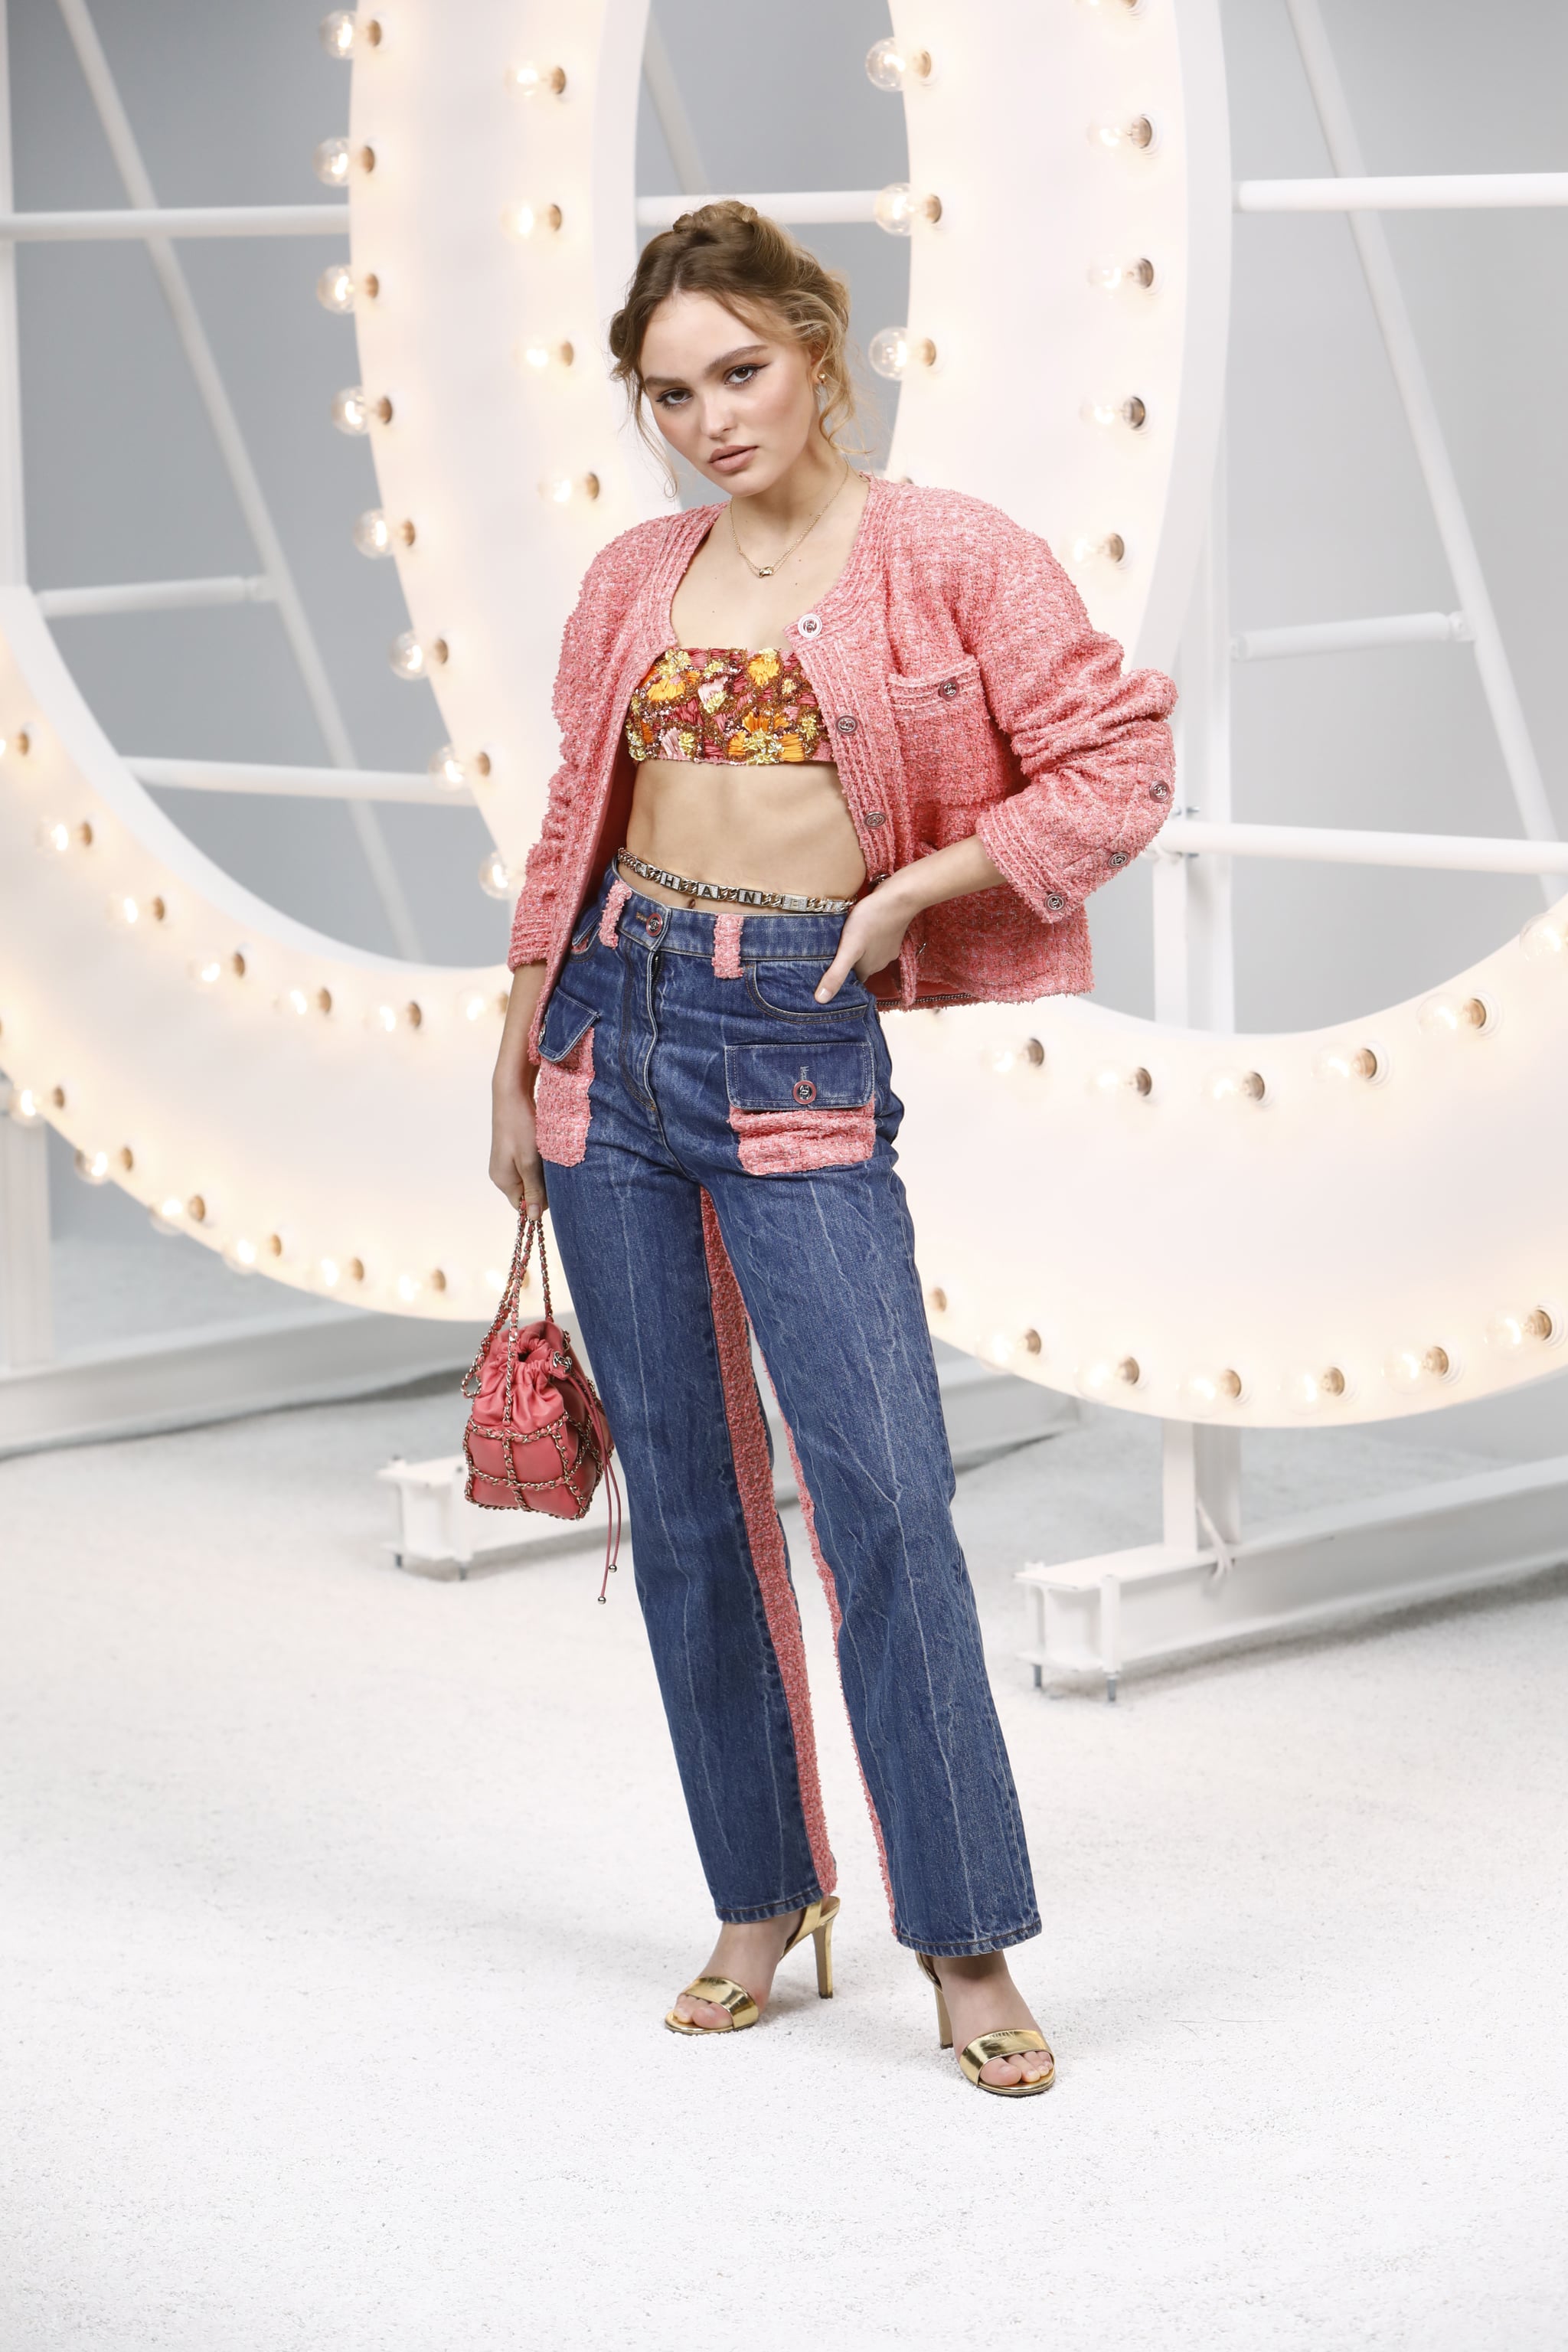 Lily-Rose Depp's Outfit at the Spring 2021 Chanel Show | POPSUGAR Fashion